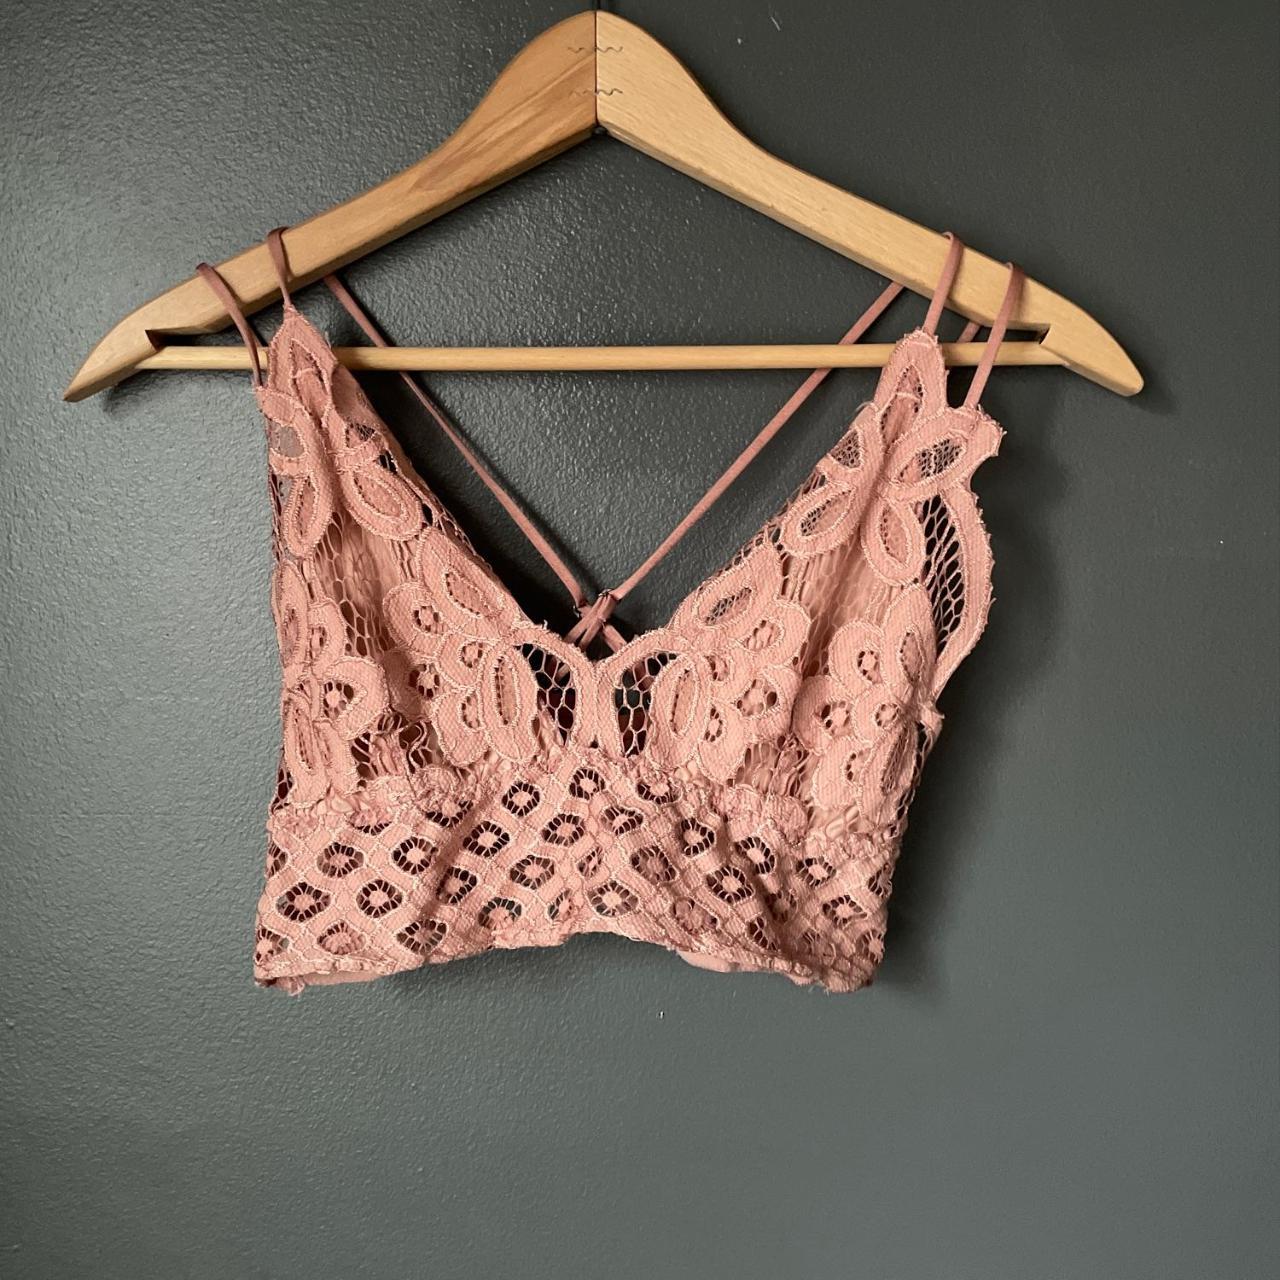 Product Image 1 - Bralette Pink Sz S

Perfect lace